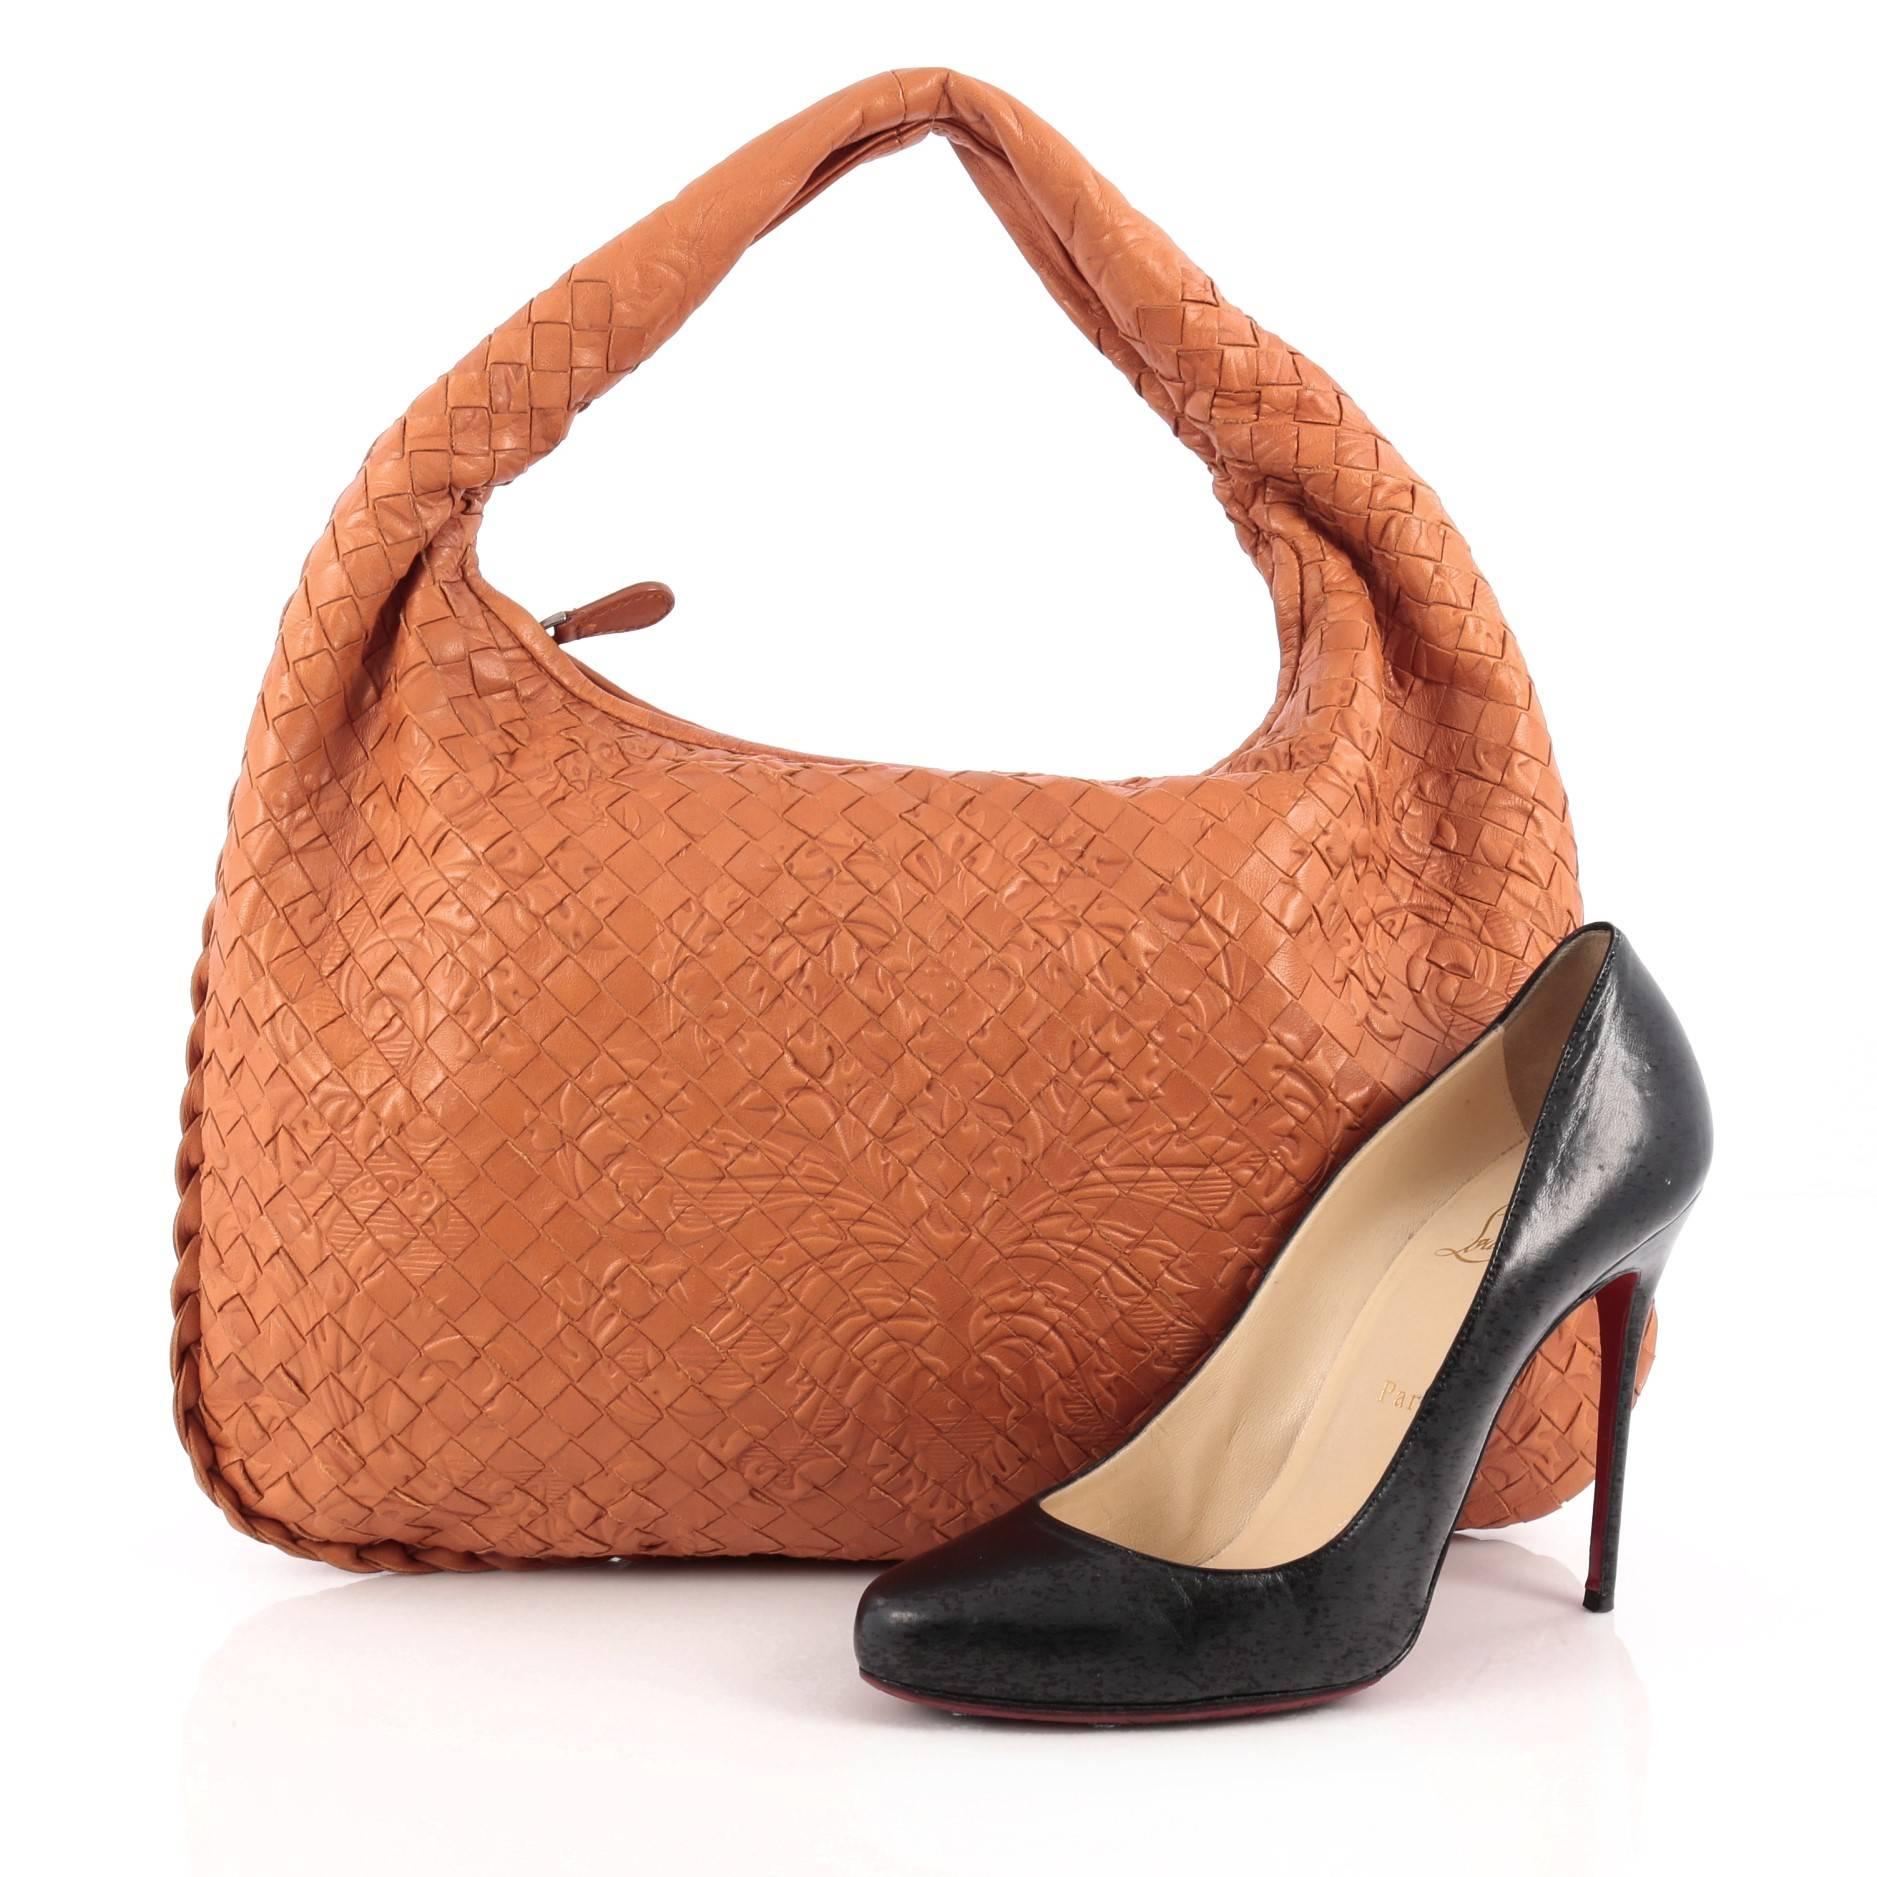 This authentic Bottega Veneta Veneta Hobo Embossed Intrecciato Nappa Medium is a timelessly elegant bag with a casual silhouette. Excellently crafted from orange nappa leather woven in Bottega Veneta's signature intrecciato method with a subtle